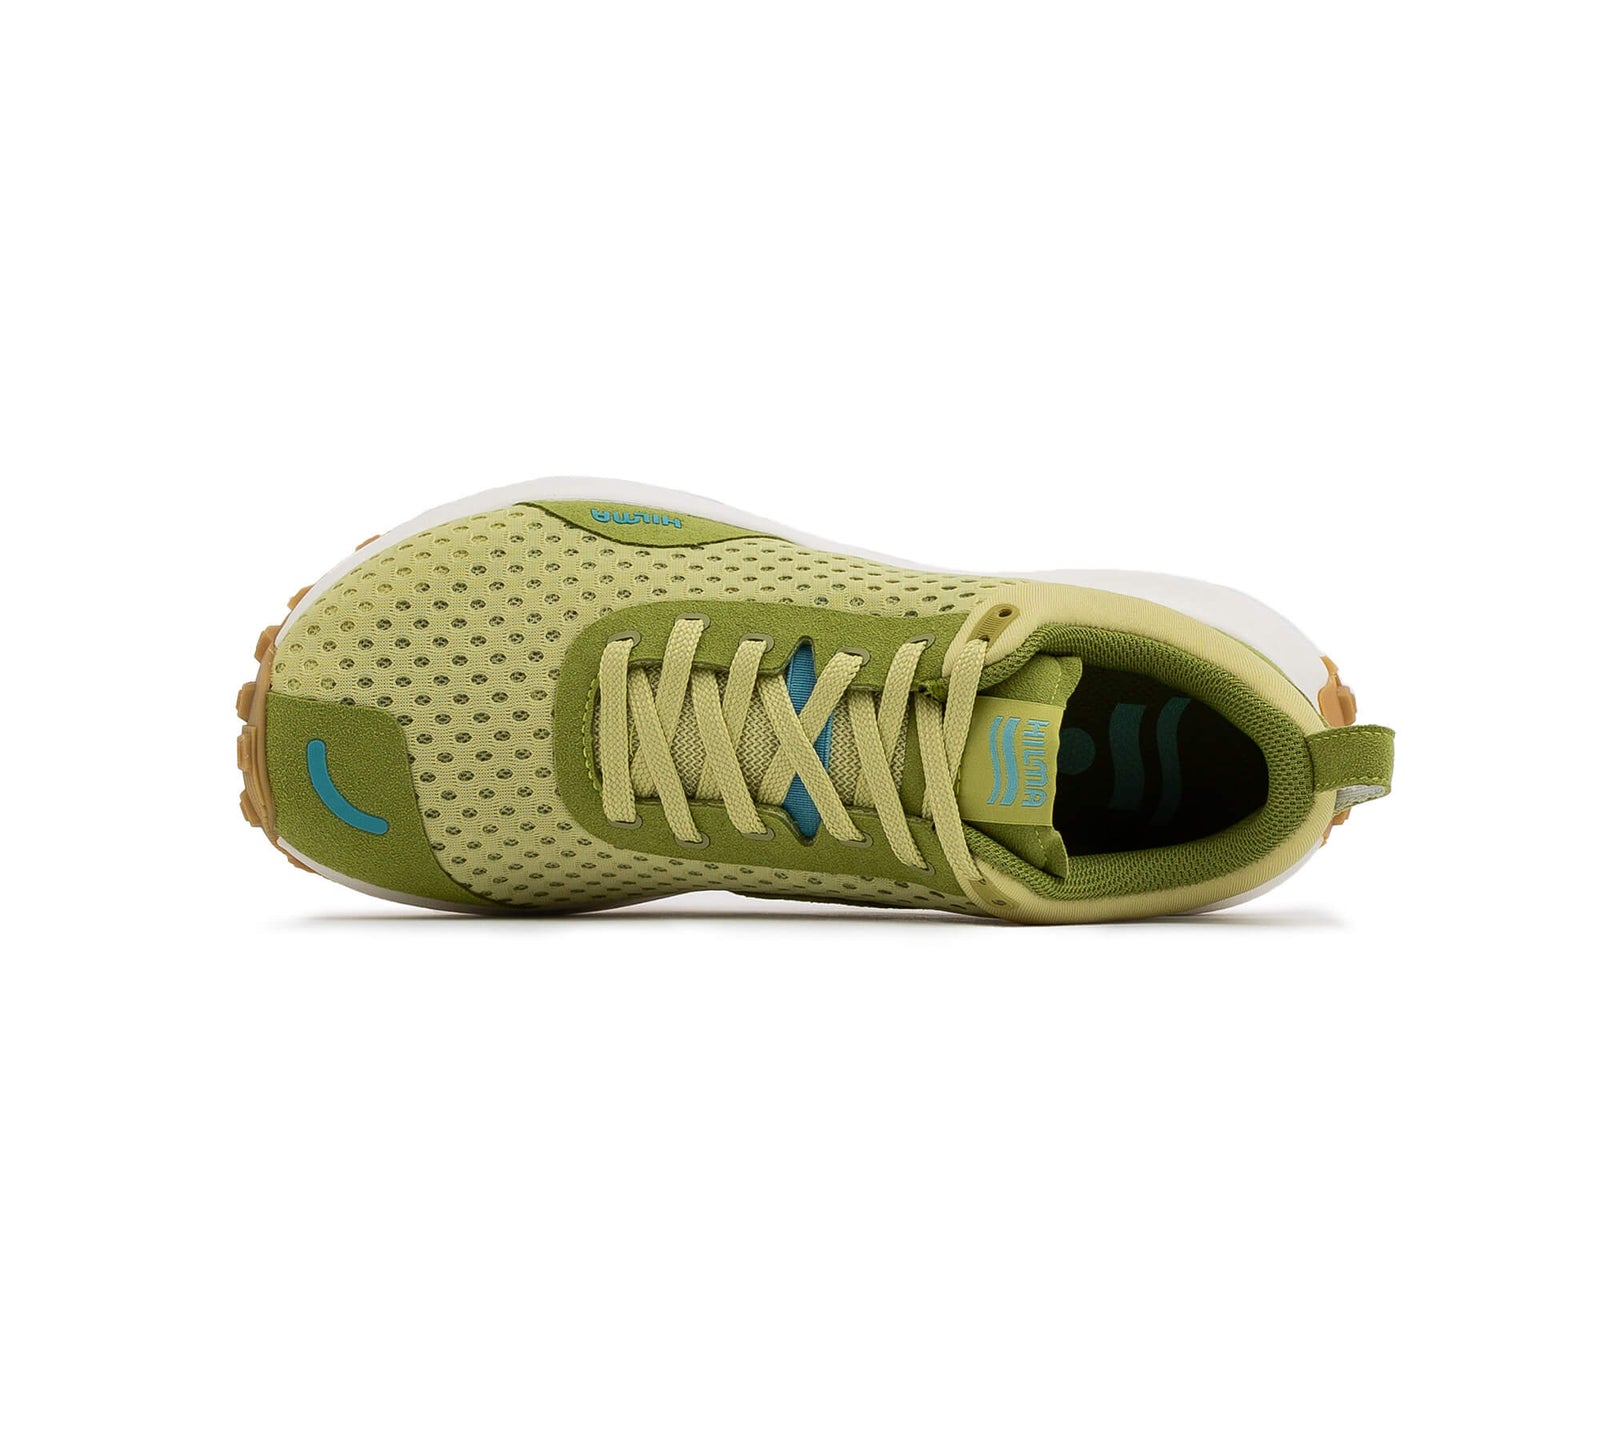 Hilma Running Shoes - Linden Green Top of Shoe